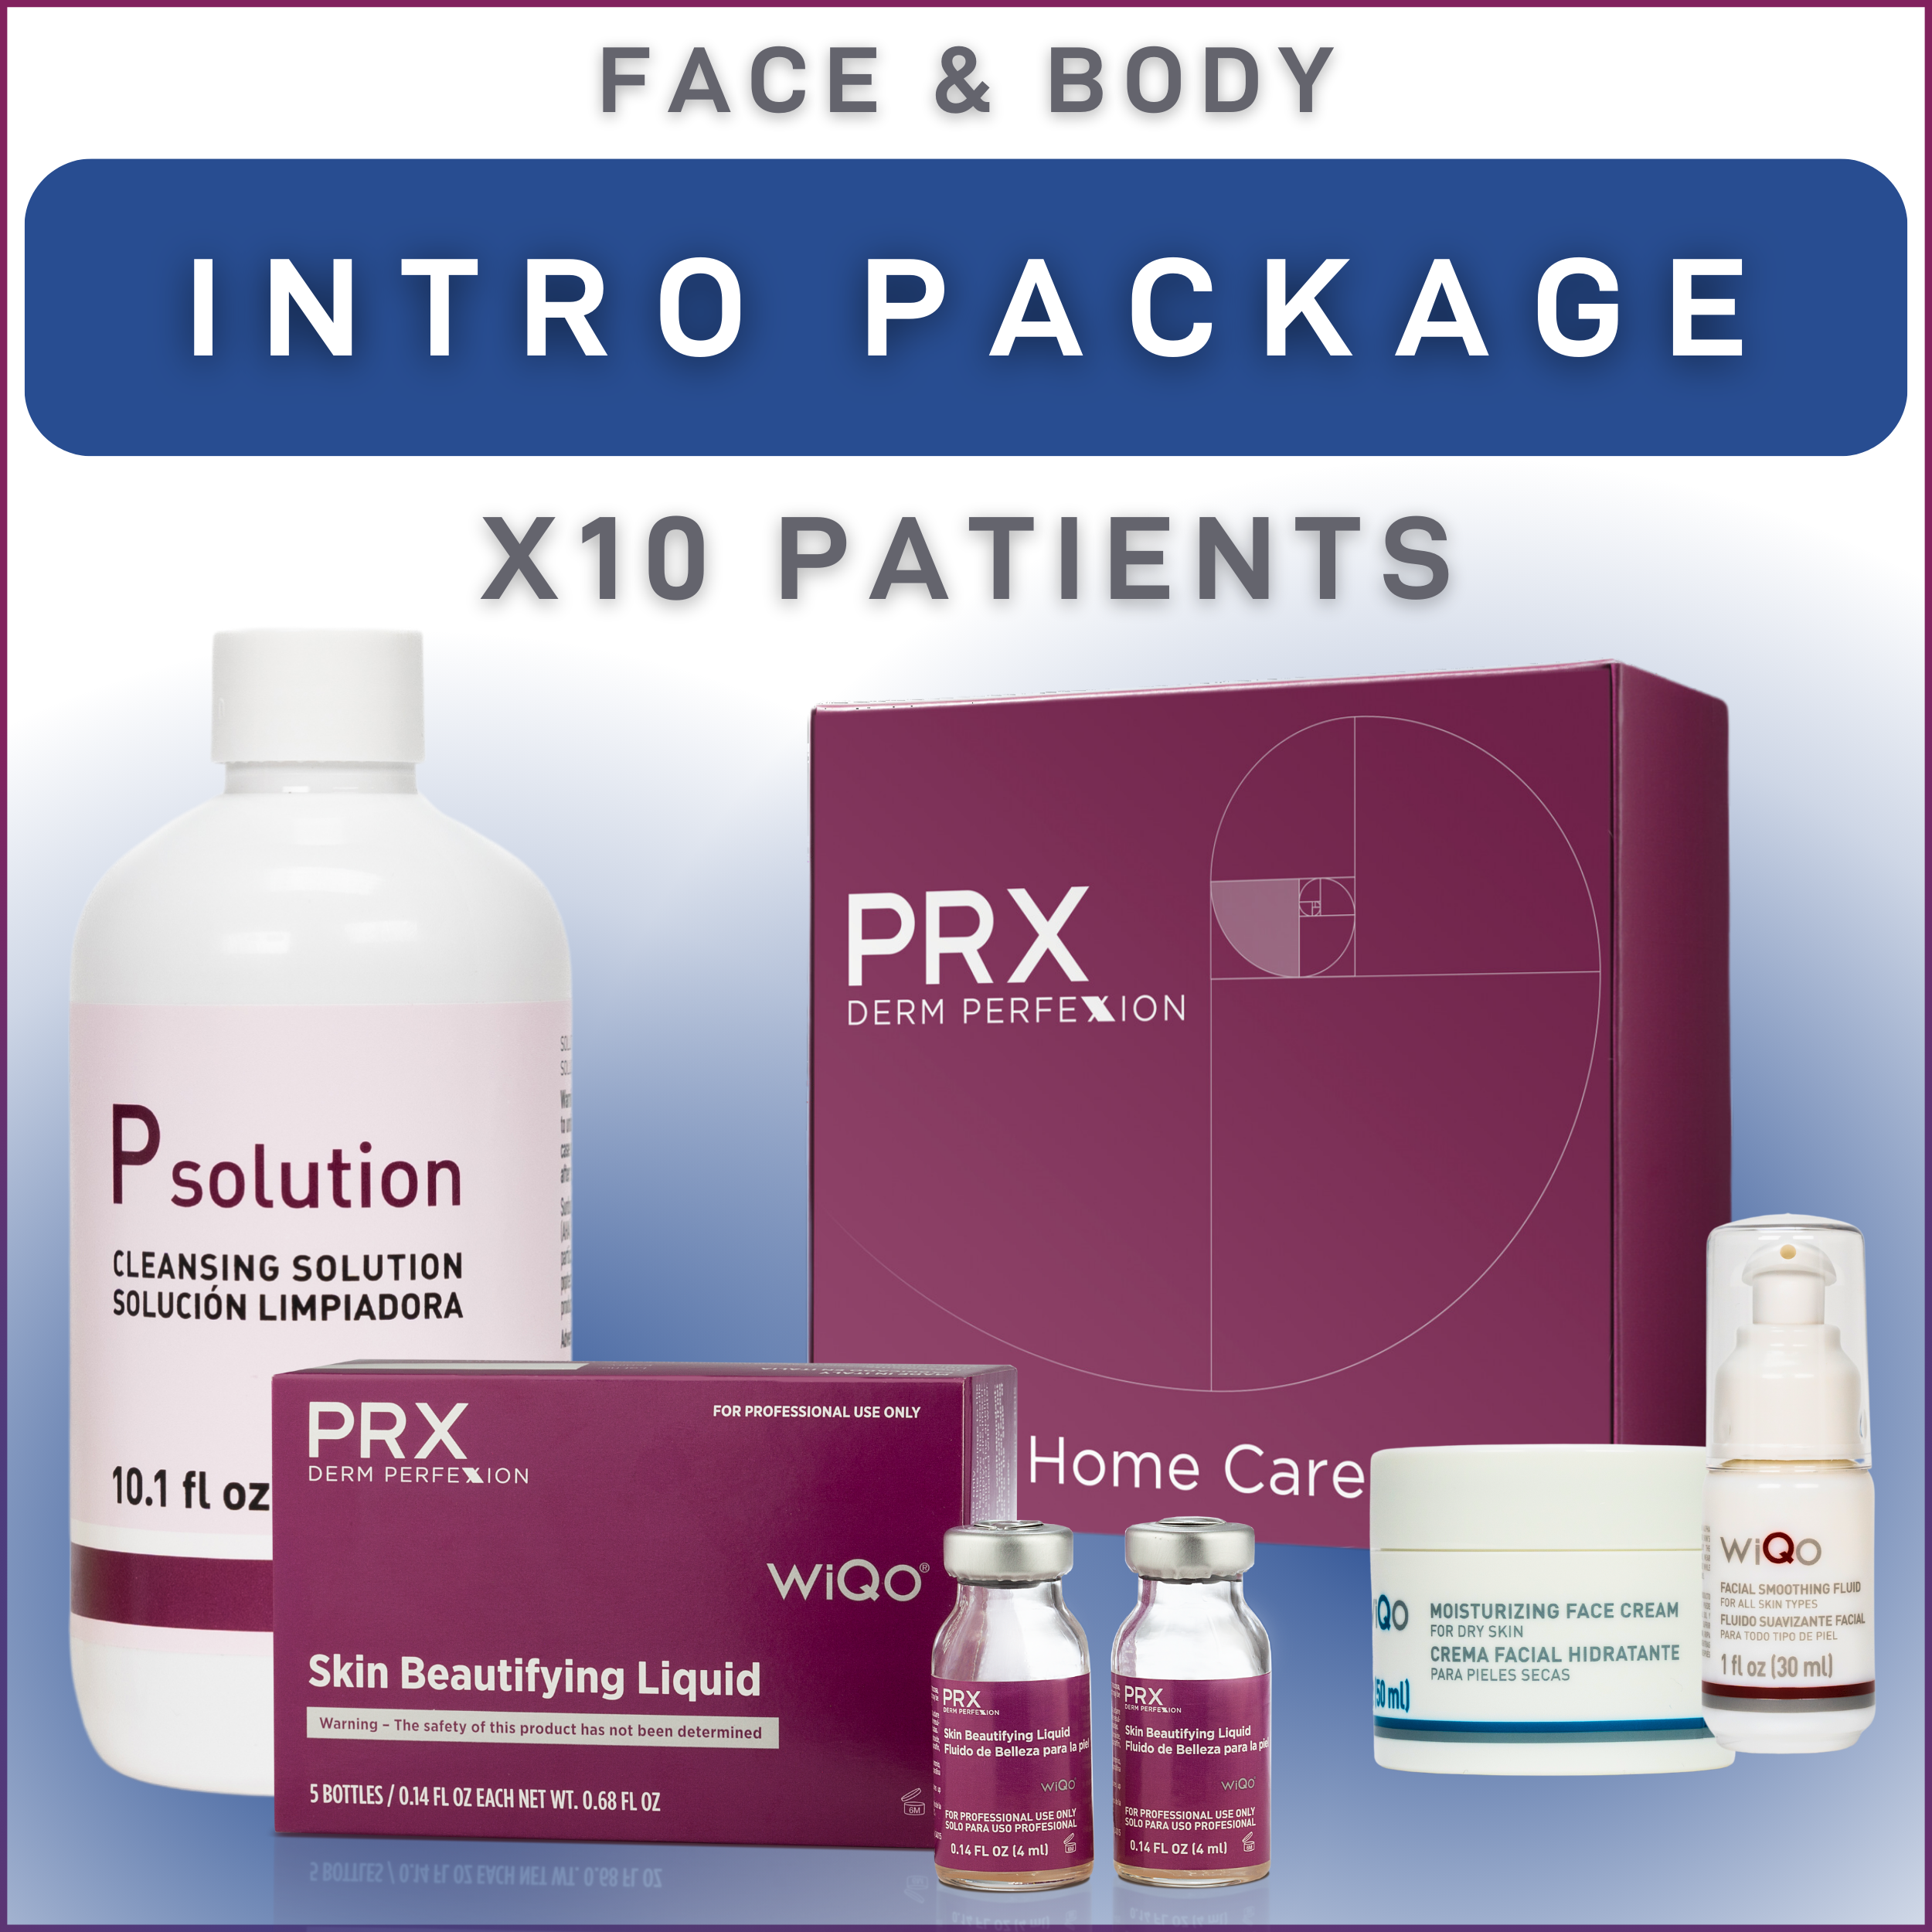 PRX Derm Perfexion Face & Body Intro Package